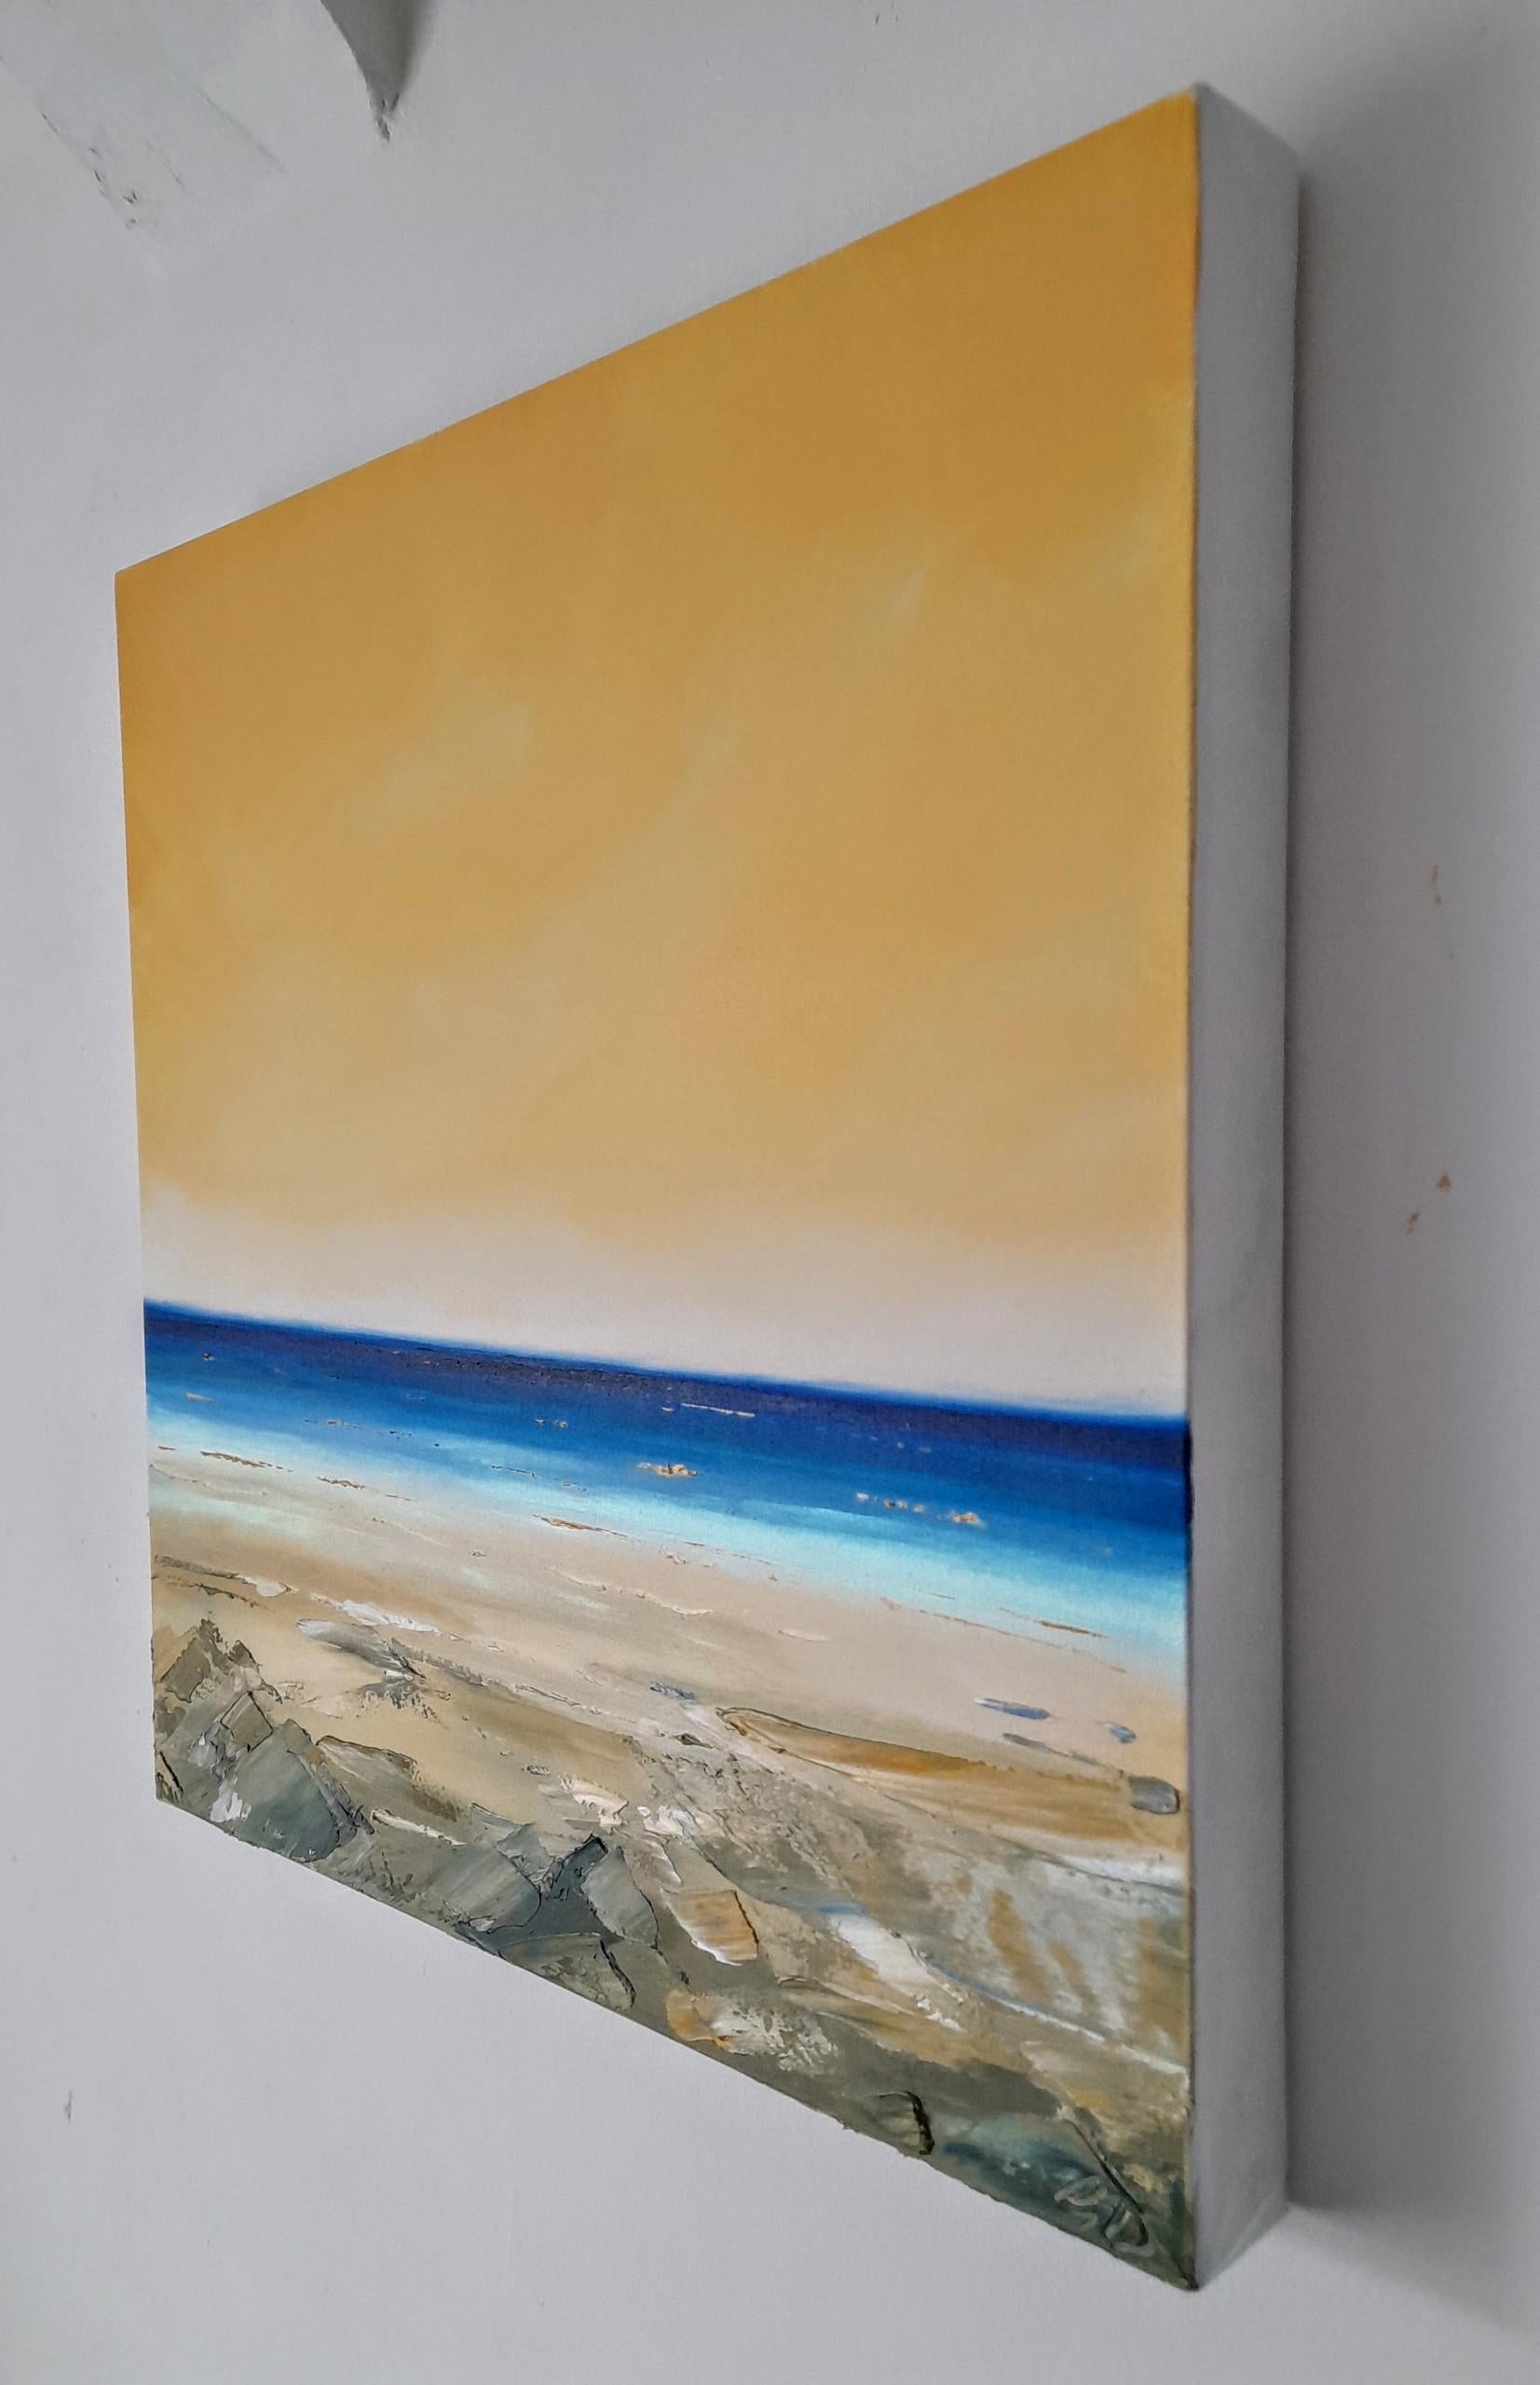 'Gloaming Coast' is an original oil painting on fine canvas portraying a view out to sea from the beach as the sun is setting. The sky is a warm muted orange, contrasting with the deep blues in the sea. The waves and ripples in the water reflect the